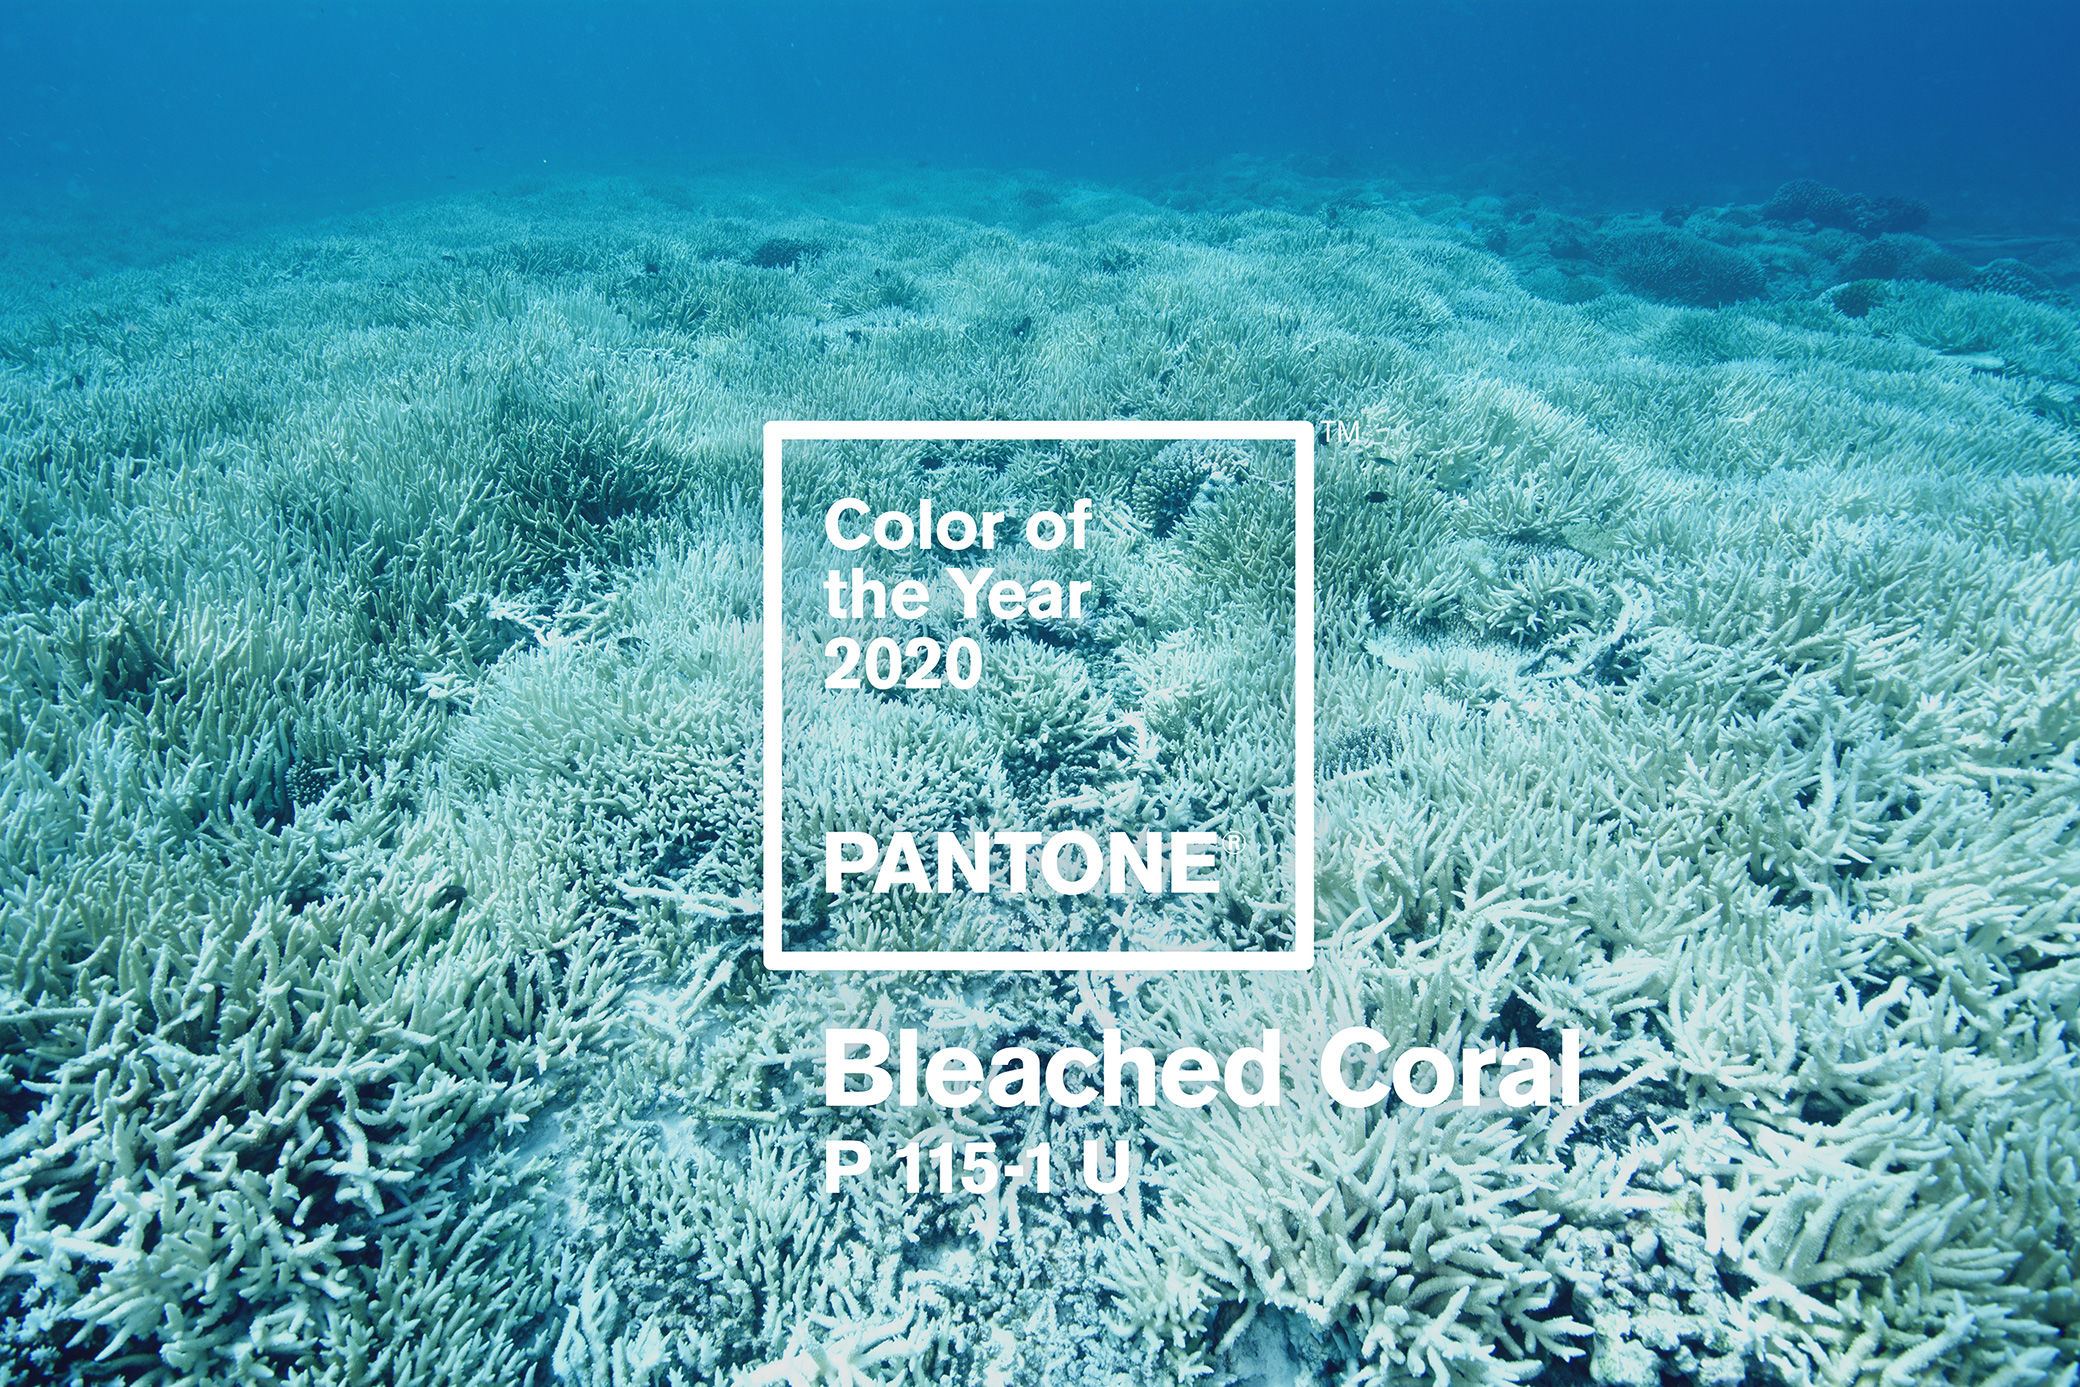 The Pantone Colour of the Year 2020 will be “Bleached Coral”